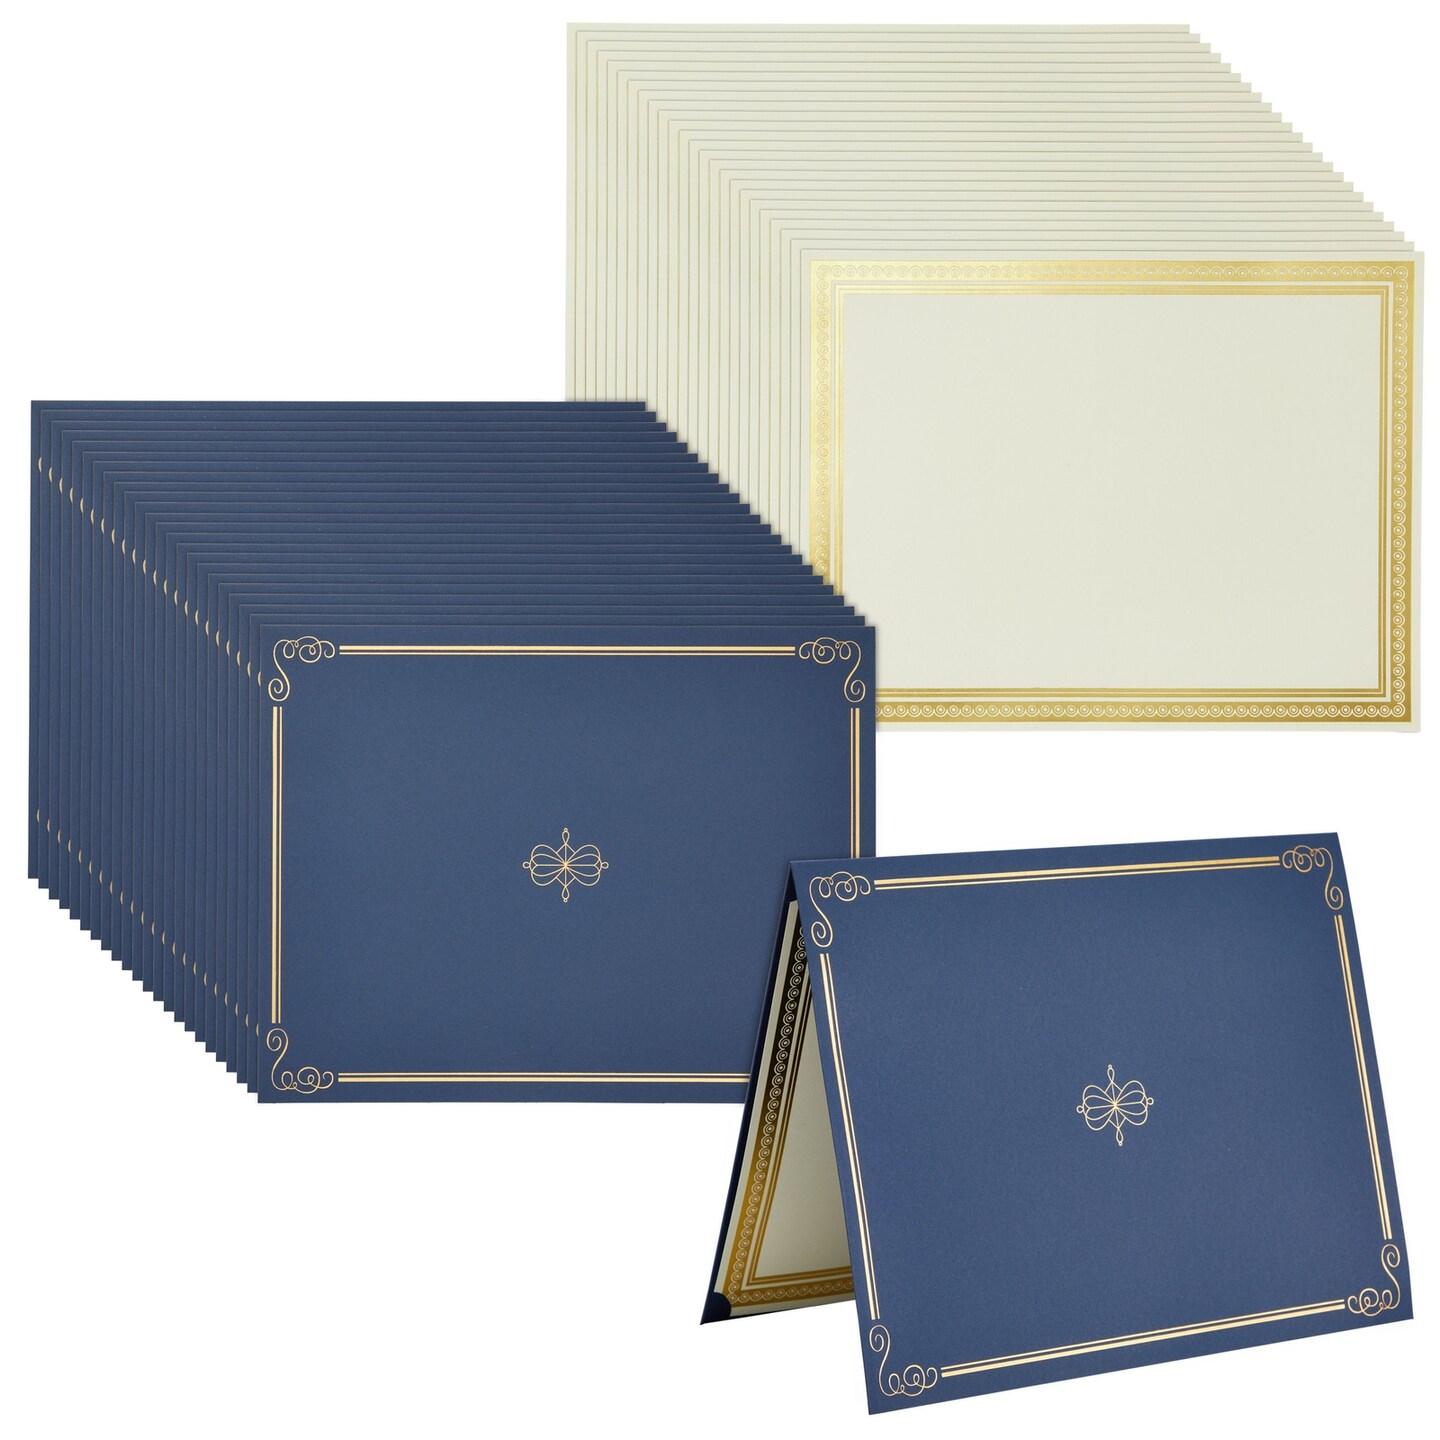 Certificate Paper with Gold and Blue Border, Award Certificates (White, 8.5 x 11 in, 50-Pack)